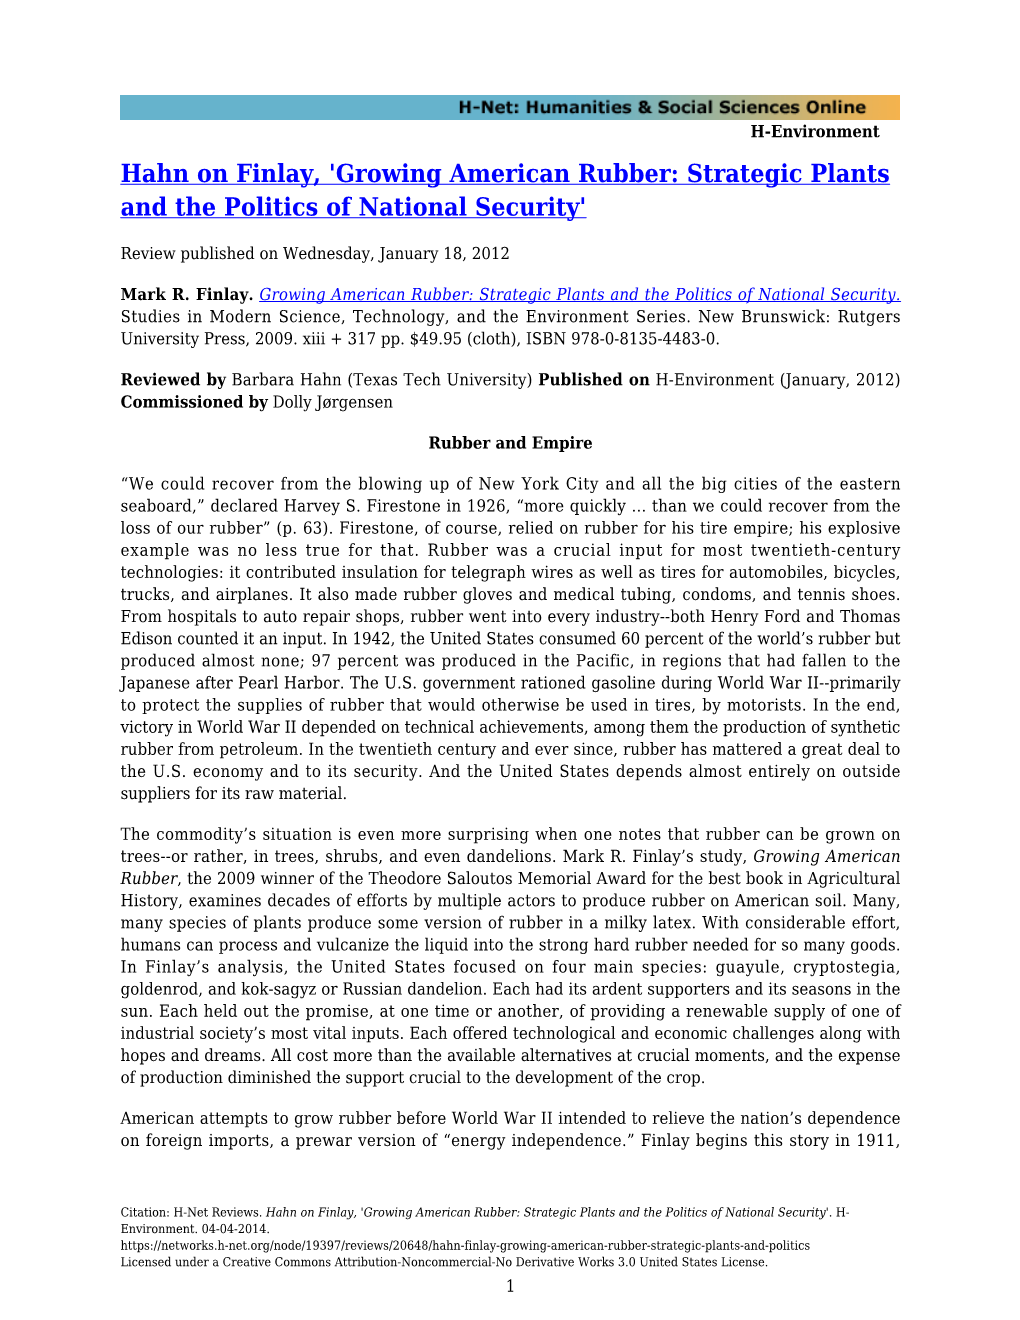 Hahn on Finlay, 'Growing American Rubber: Strategic Plants and the Politics of National Security'